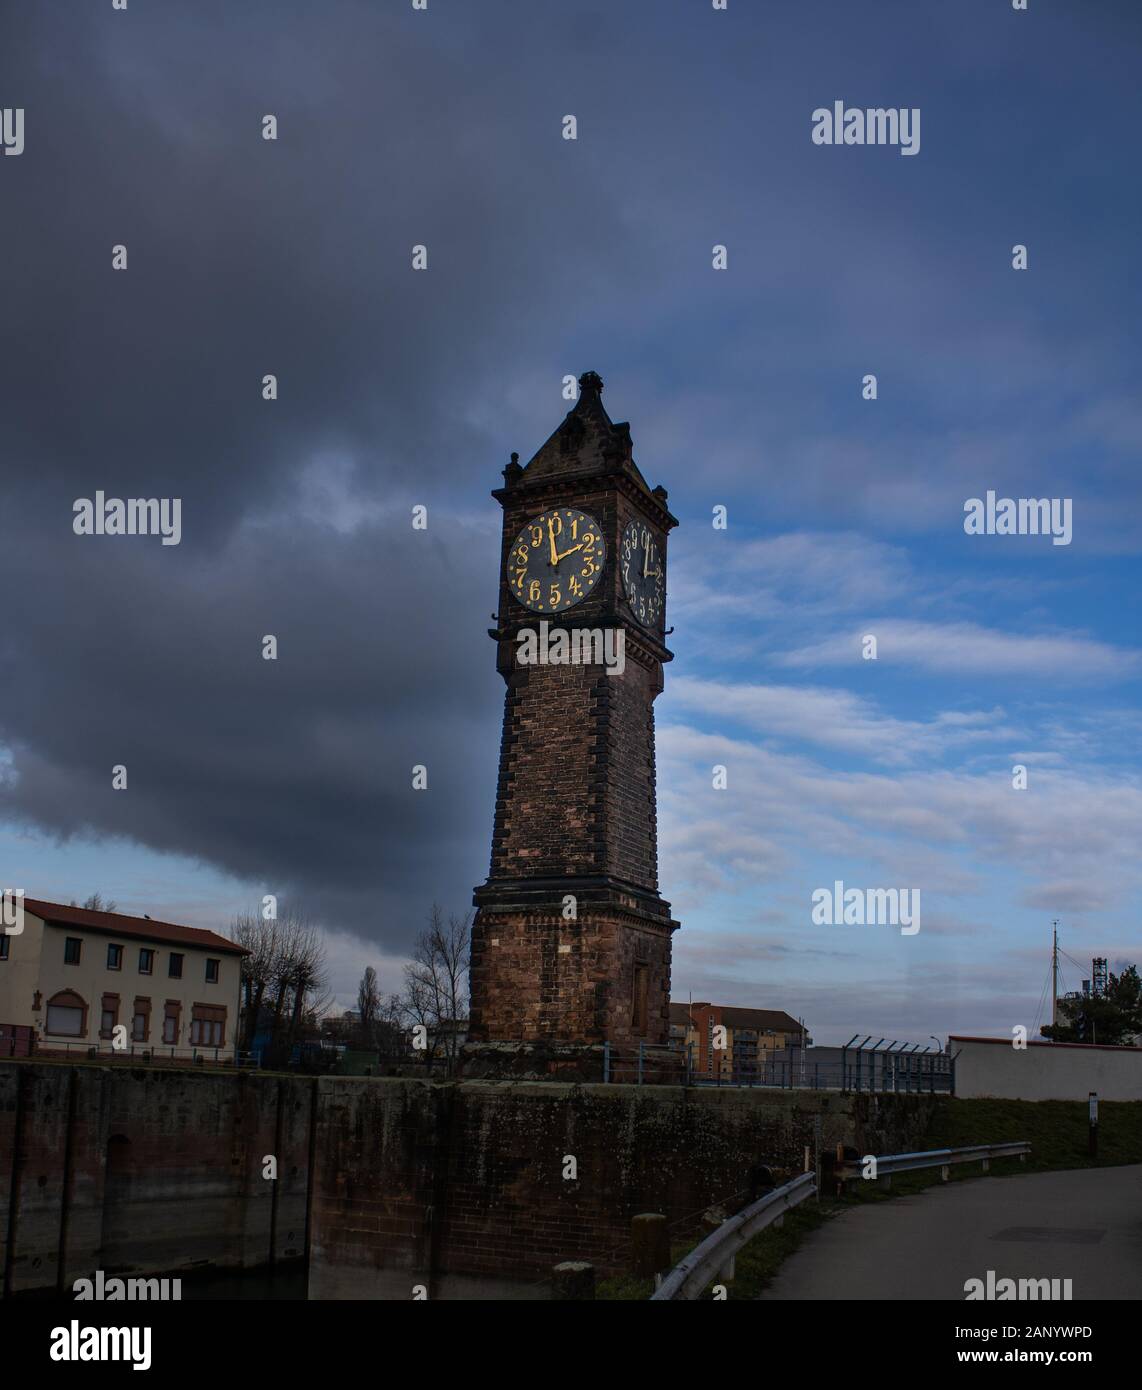 wether duality divided by a clock tower Stock Photo